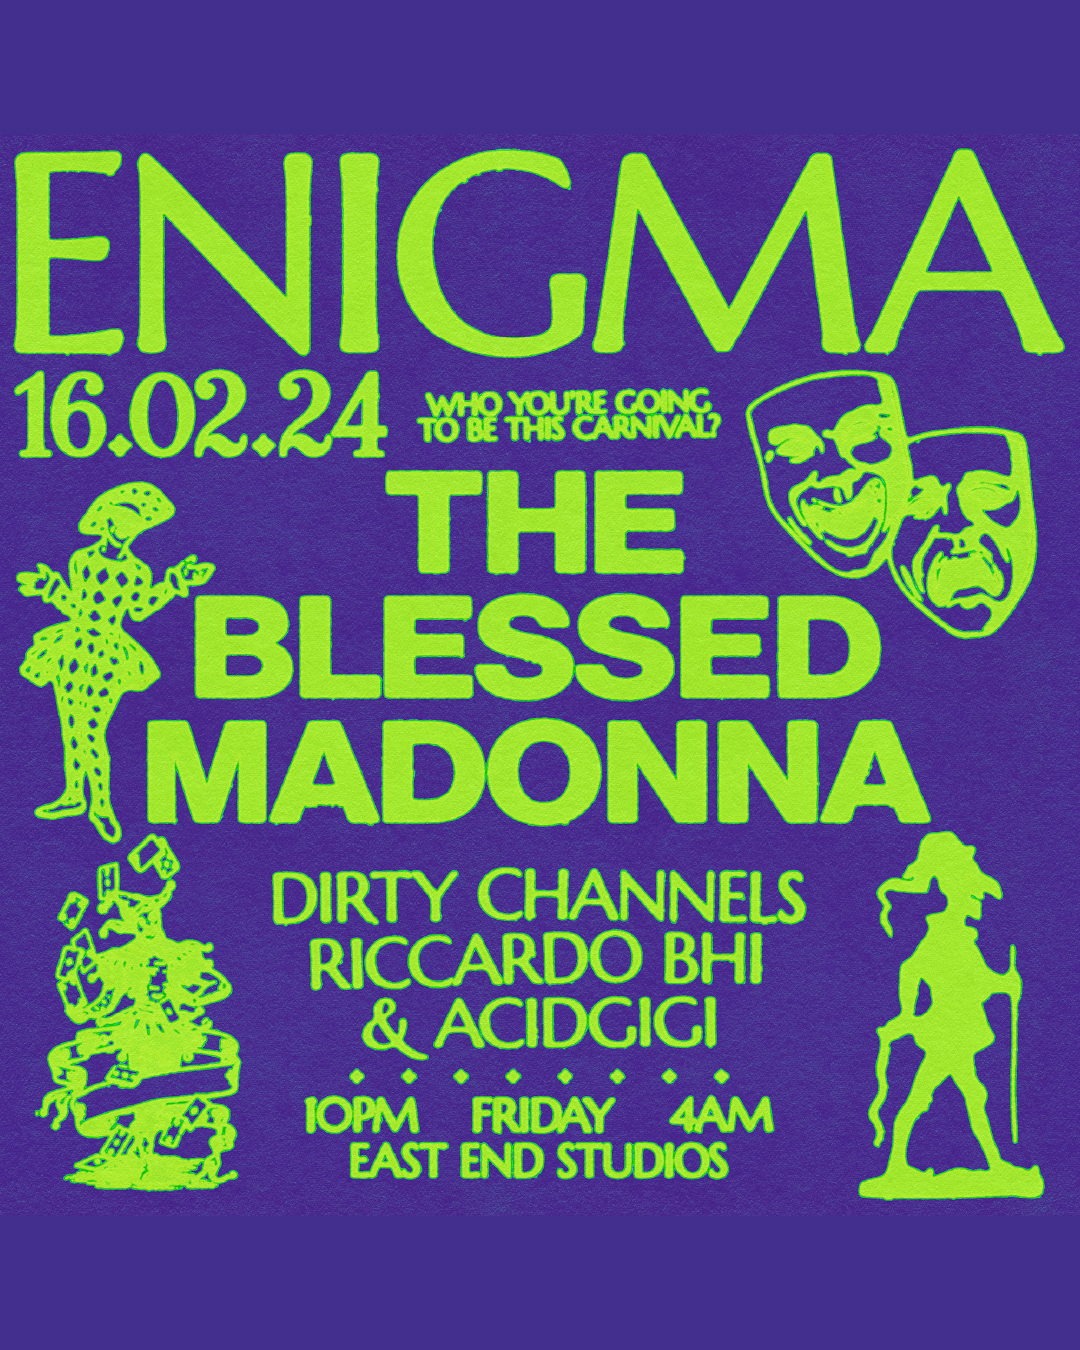 The Blessed Madonna, Biography, Music & News